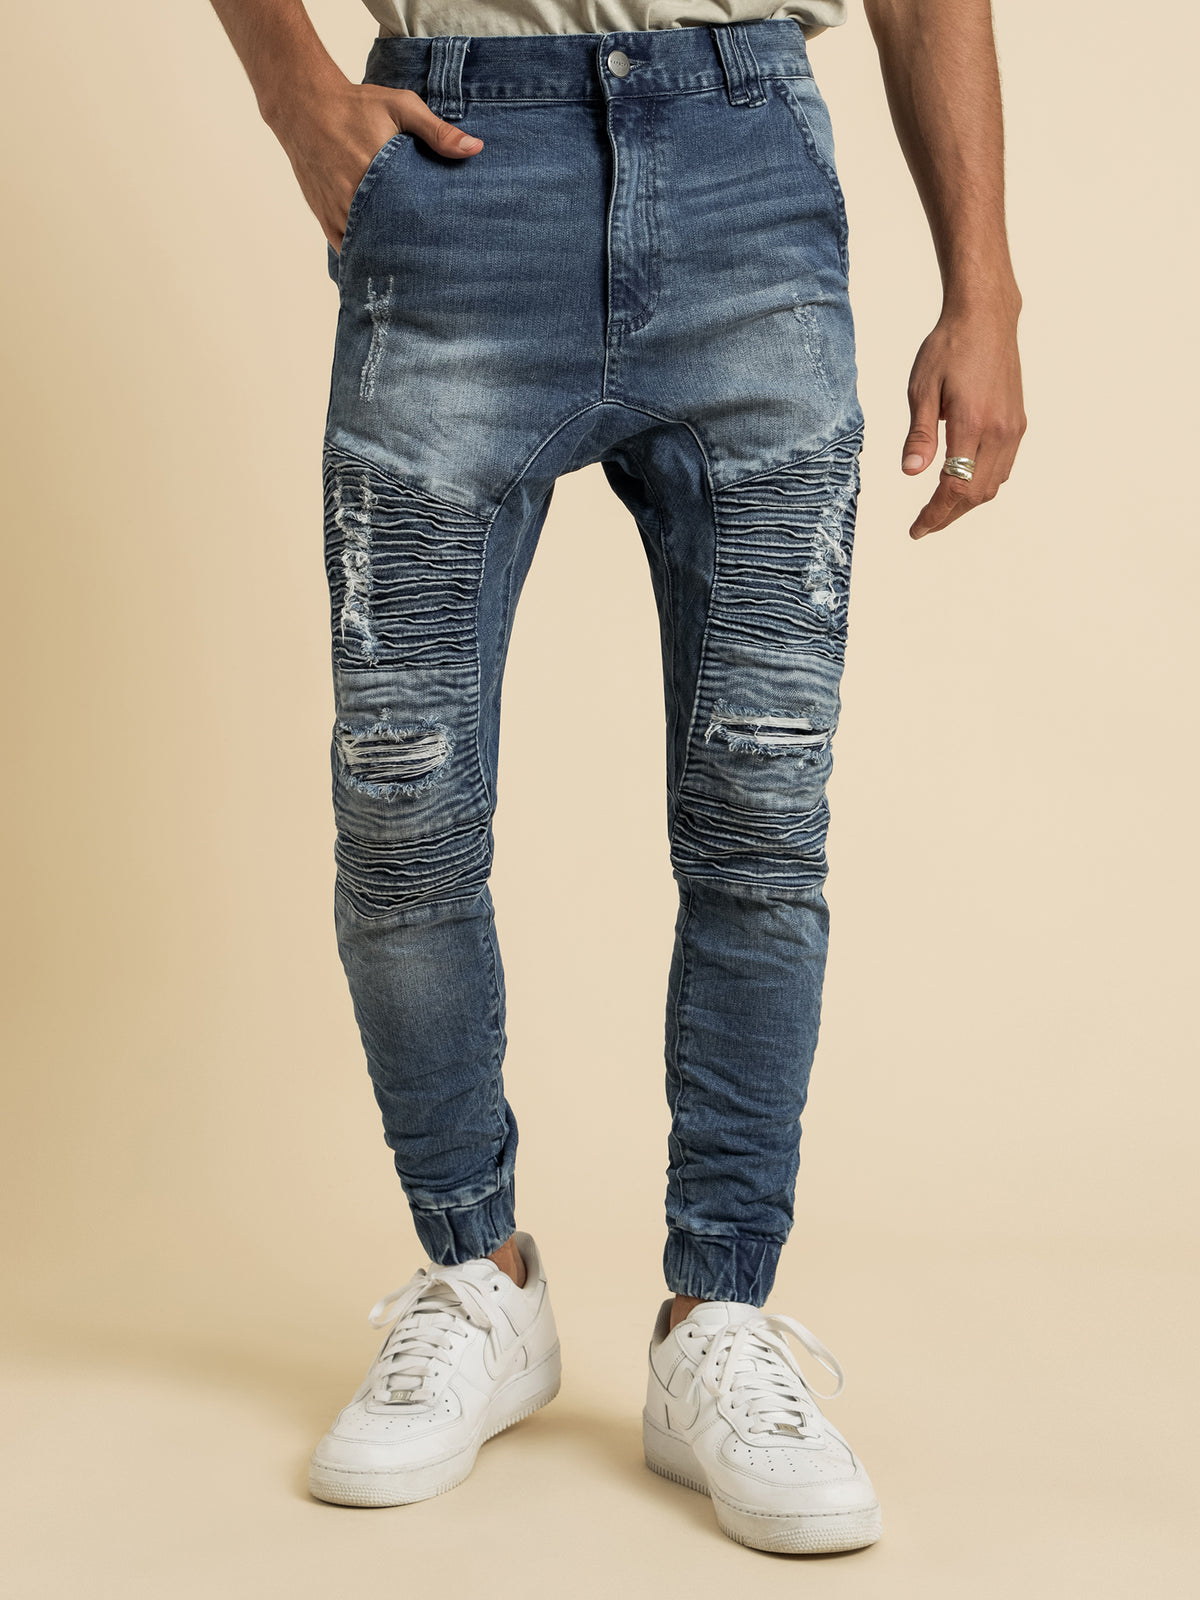 Hellcat Tight Tapered Jeans in Kentucky Blue Denim